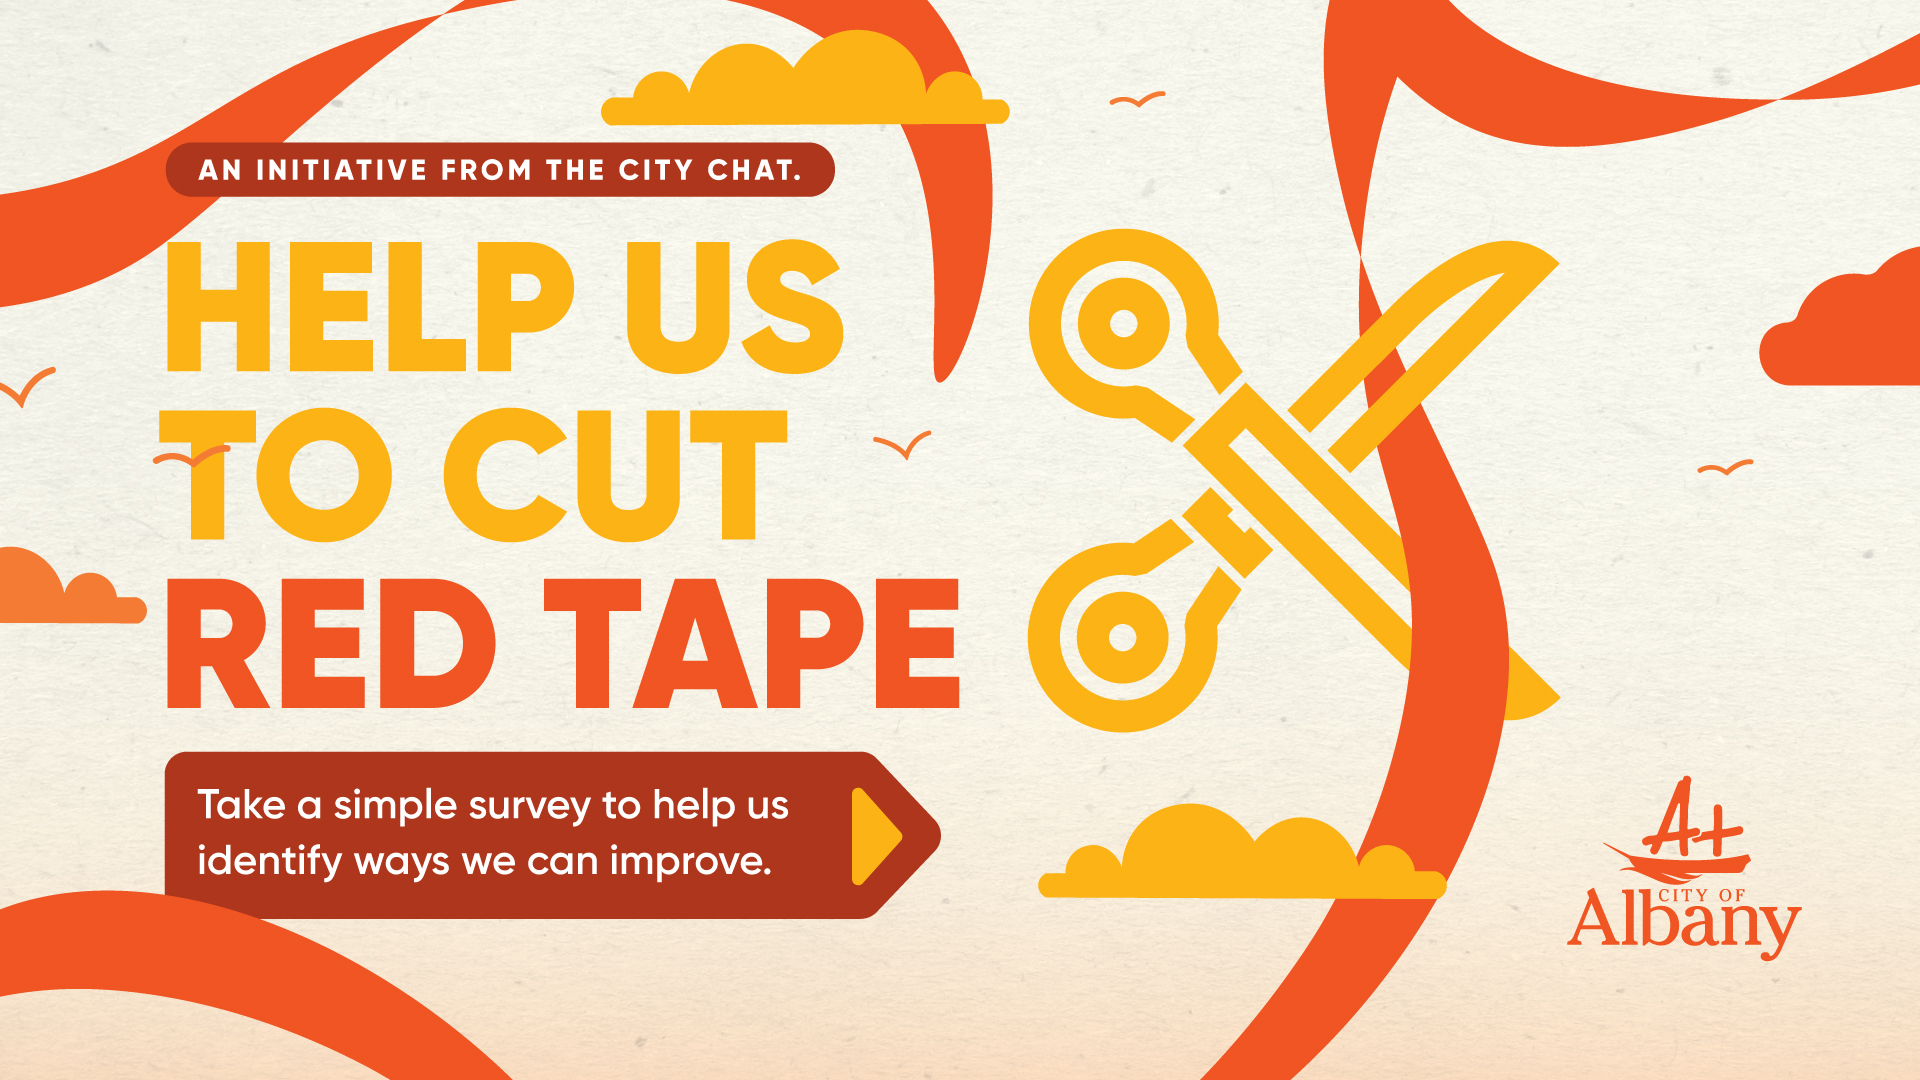 Help us cut red tape